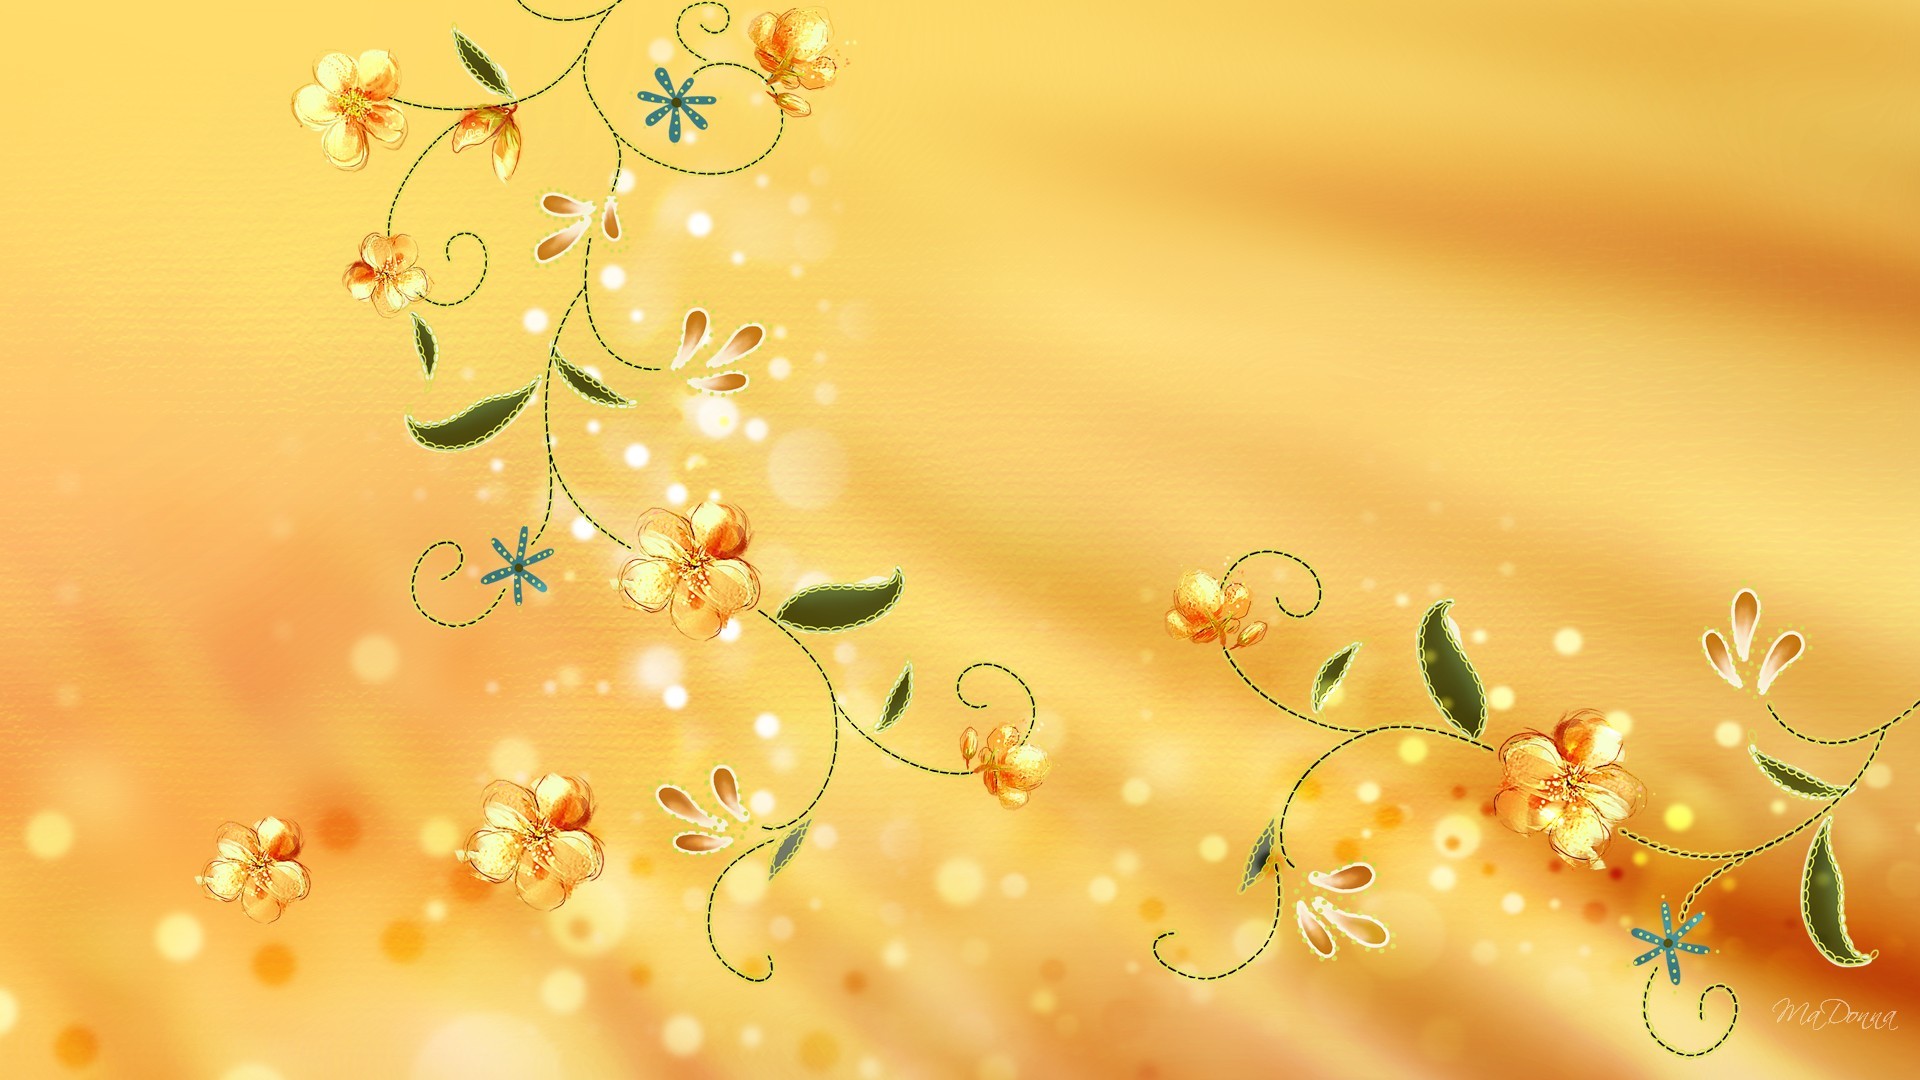 1920x1080 17 Gold Colored Backgrounds amp Wallpapers WeNeedFun 